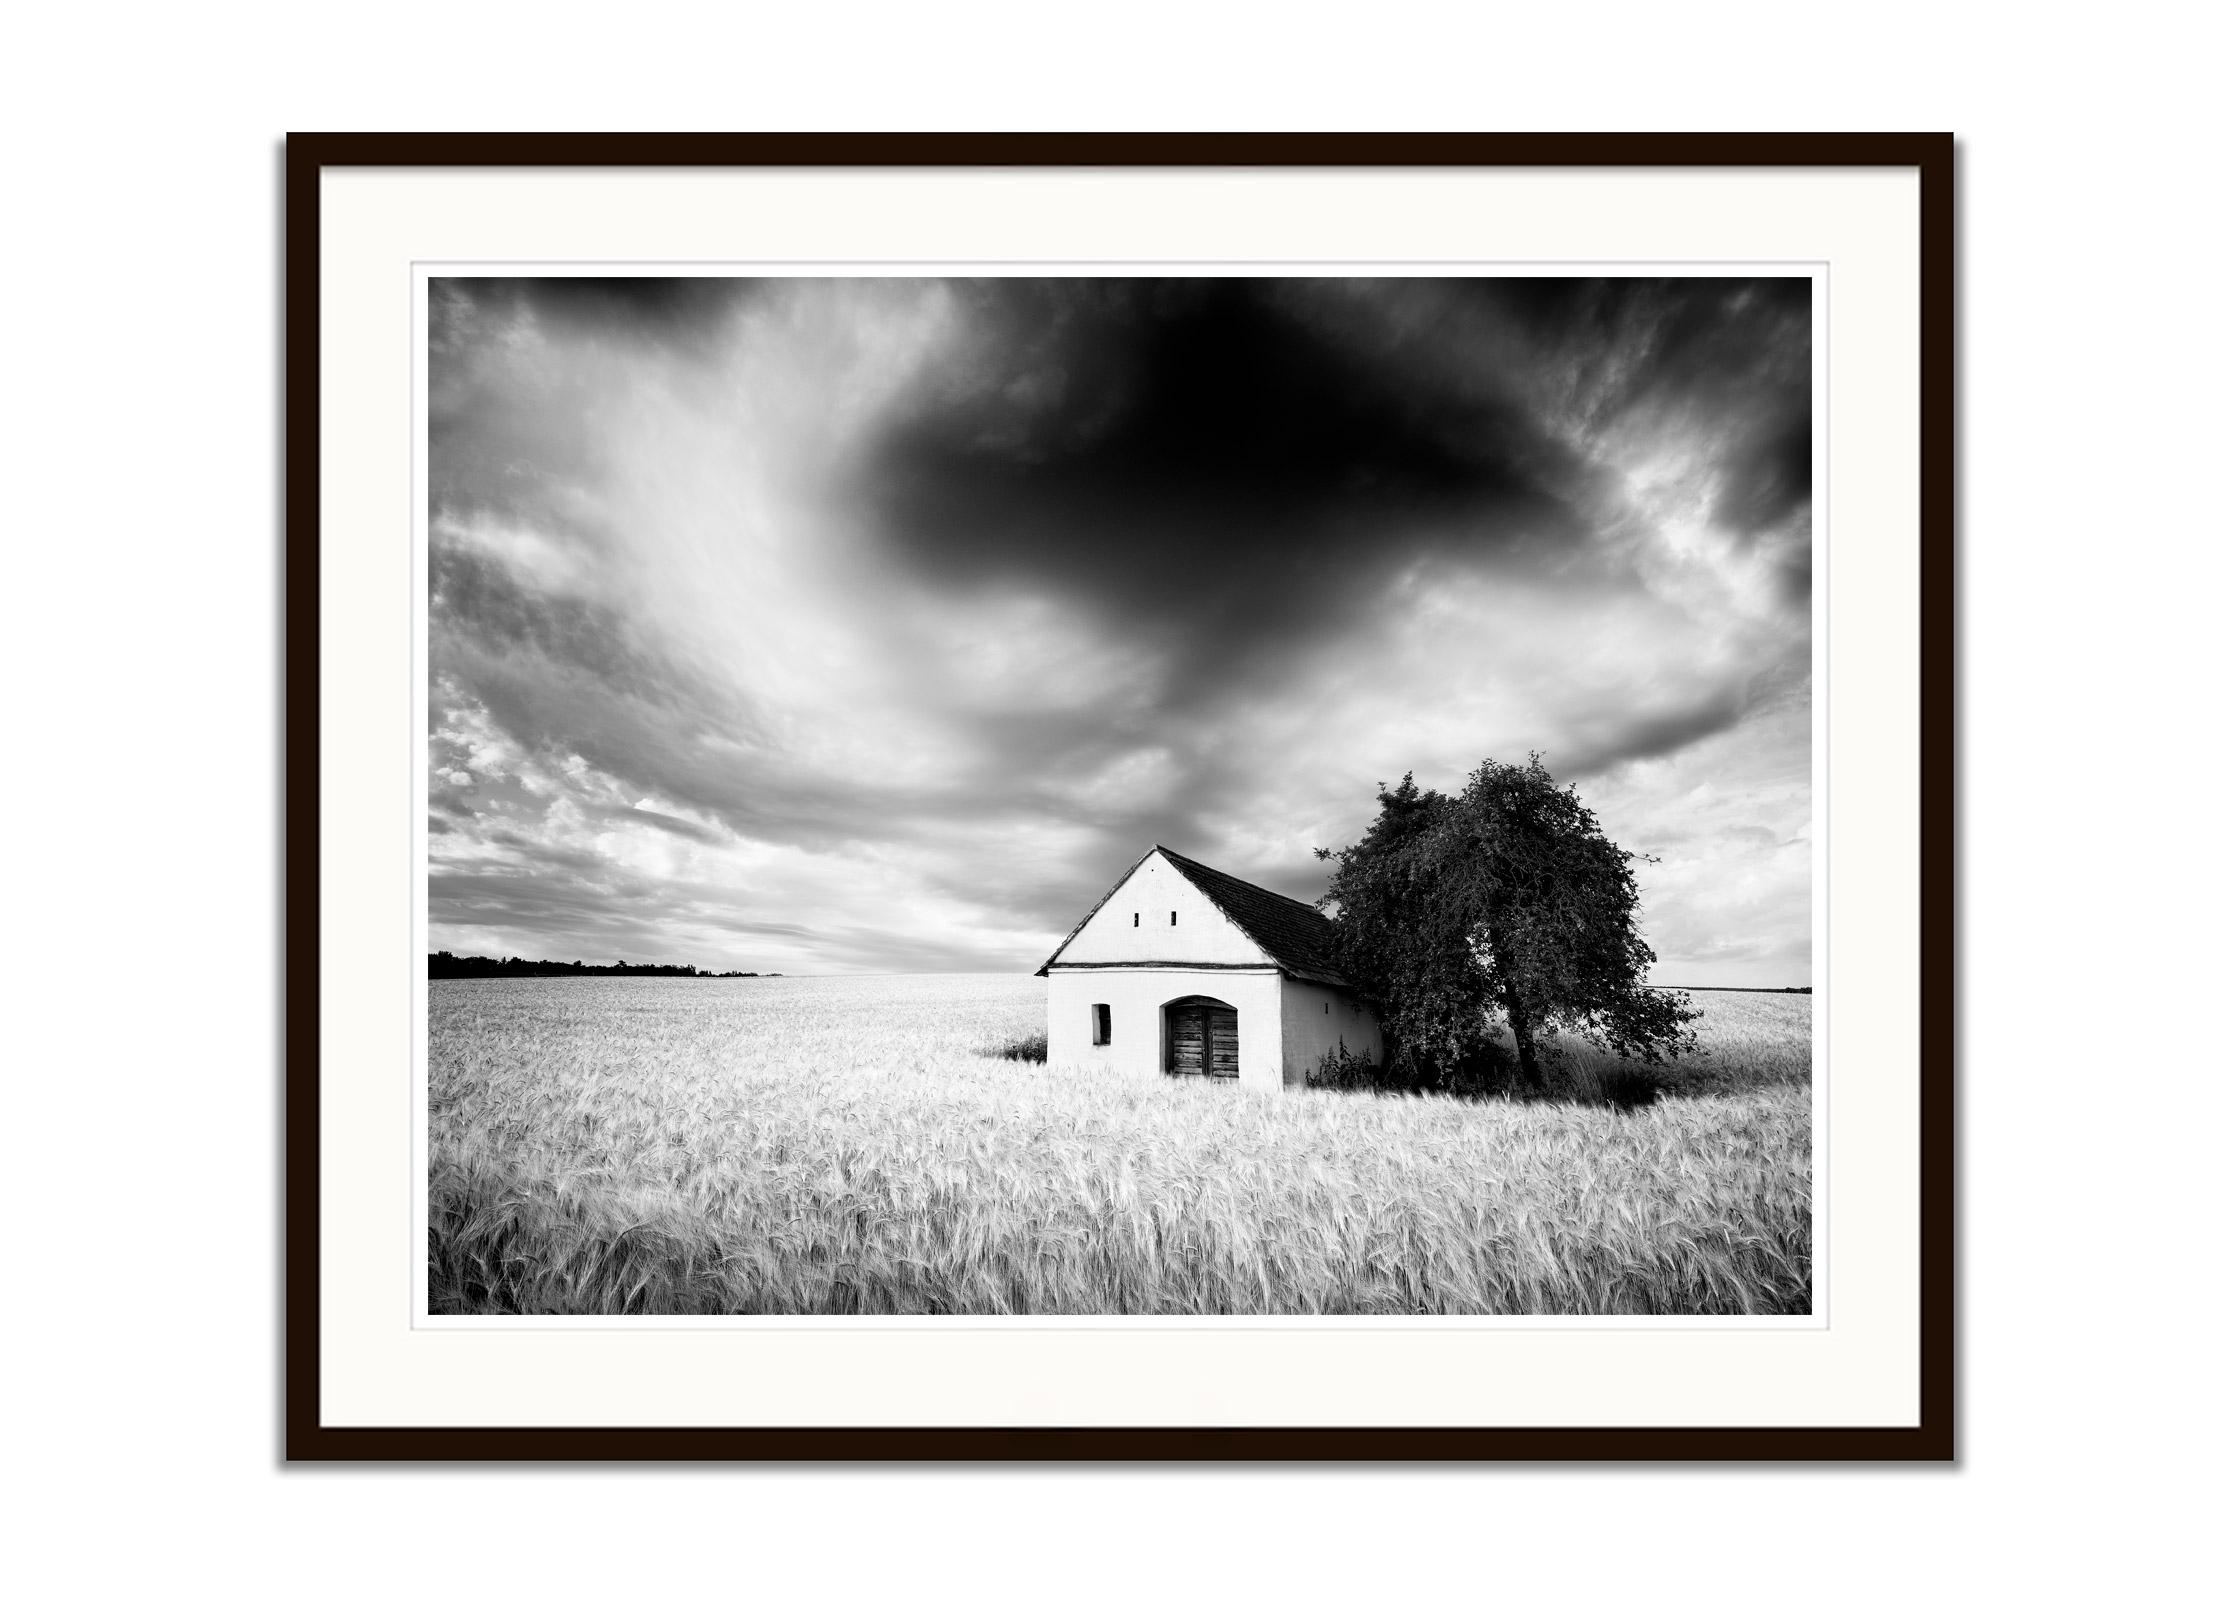 Wine Press House, wheat field, heavy clouds, black & white landscape photography - Gray Black and White Photograph by Gerald Berghammer